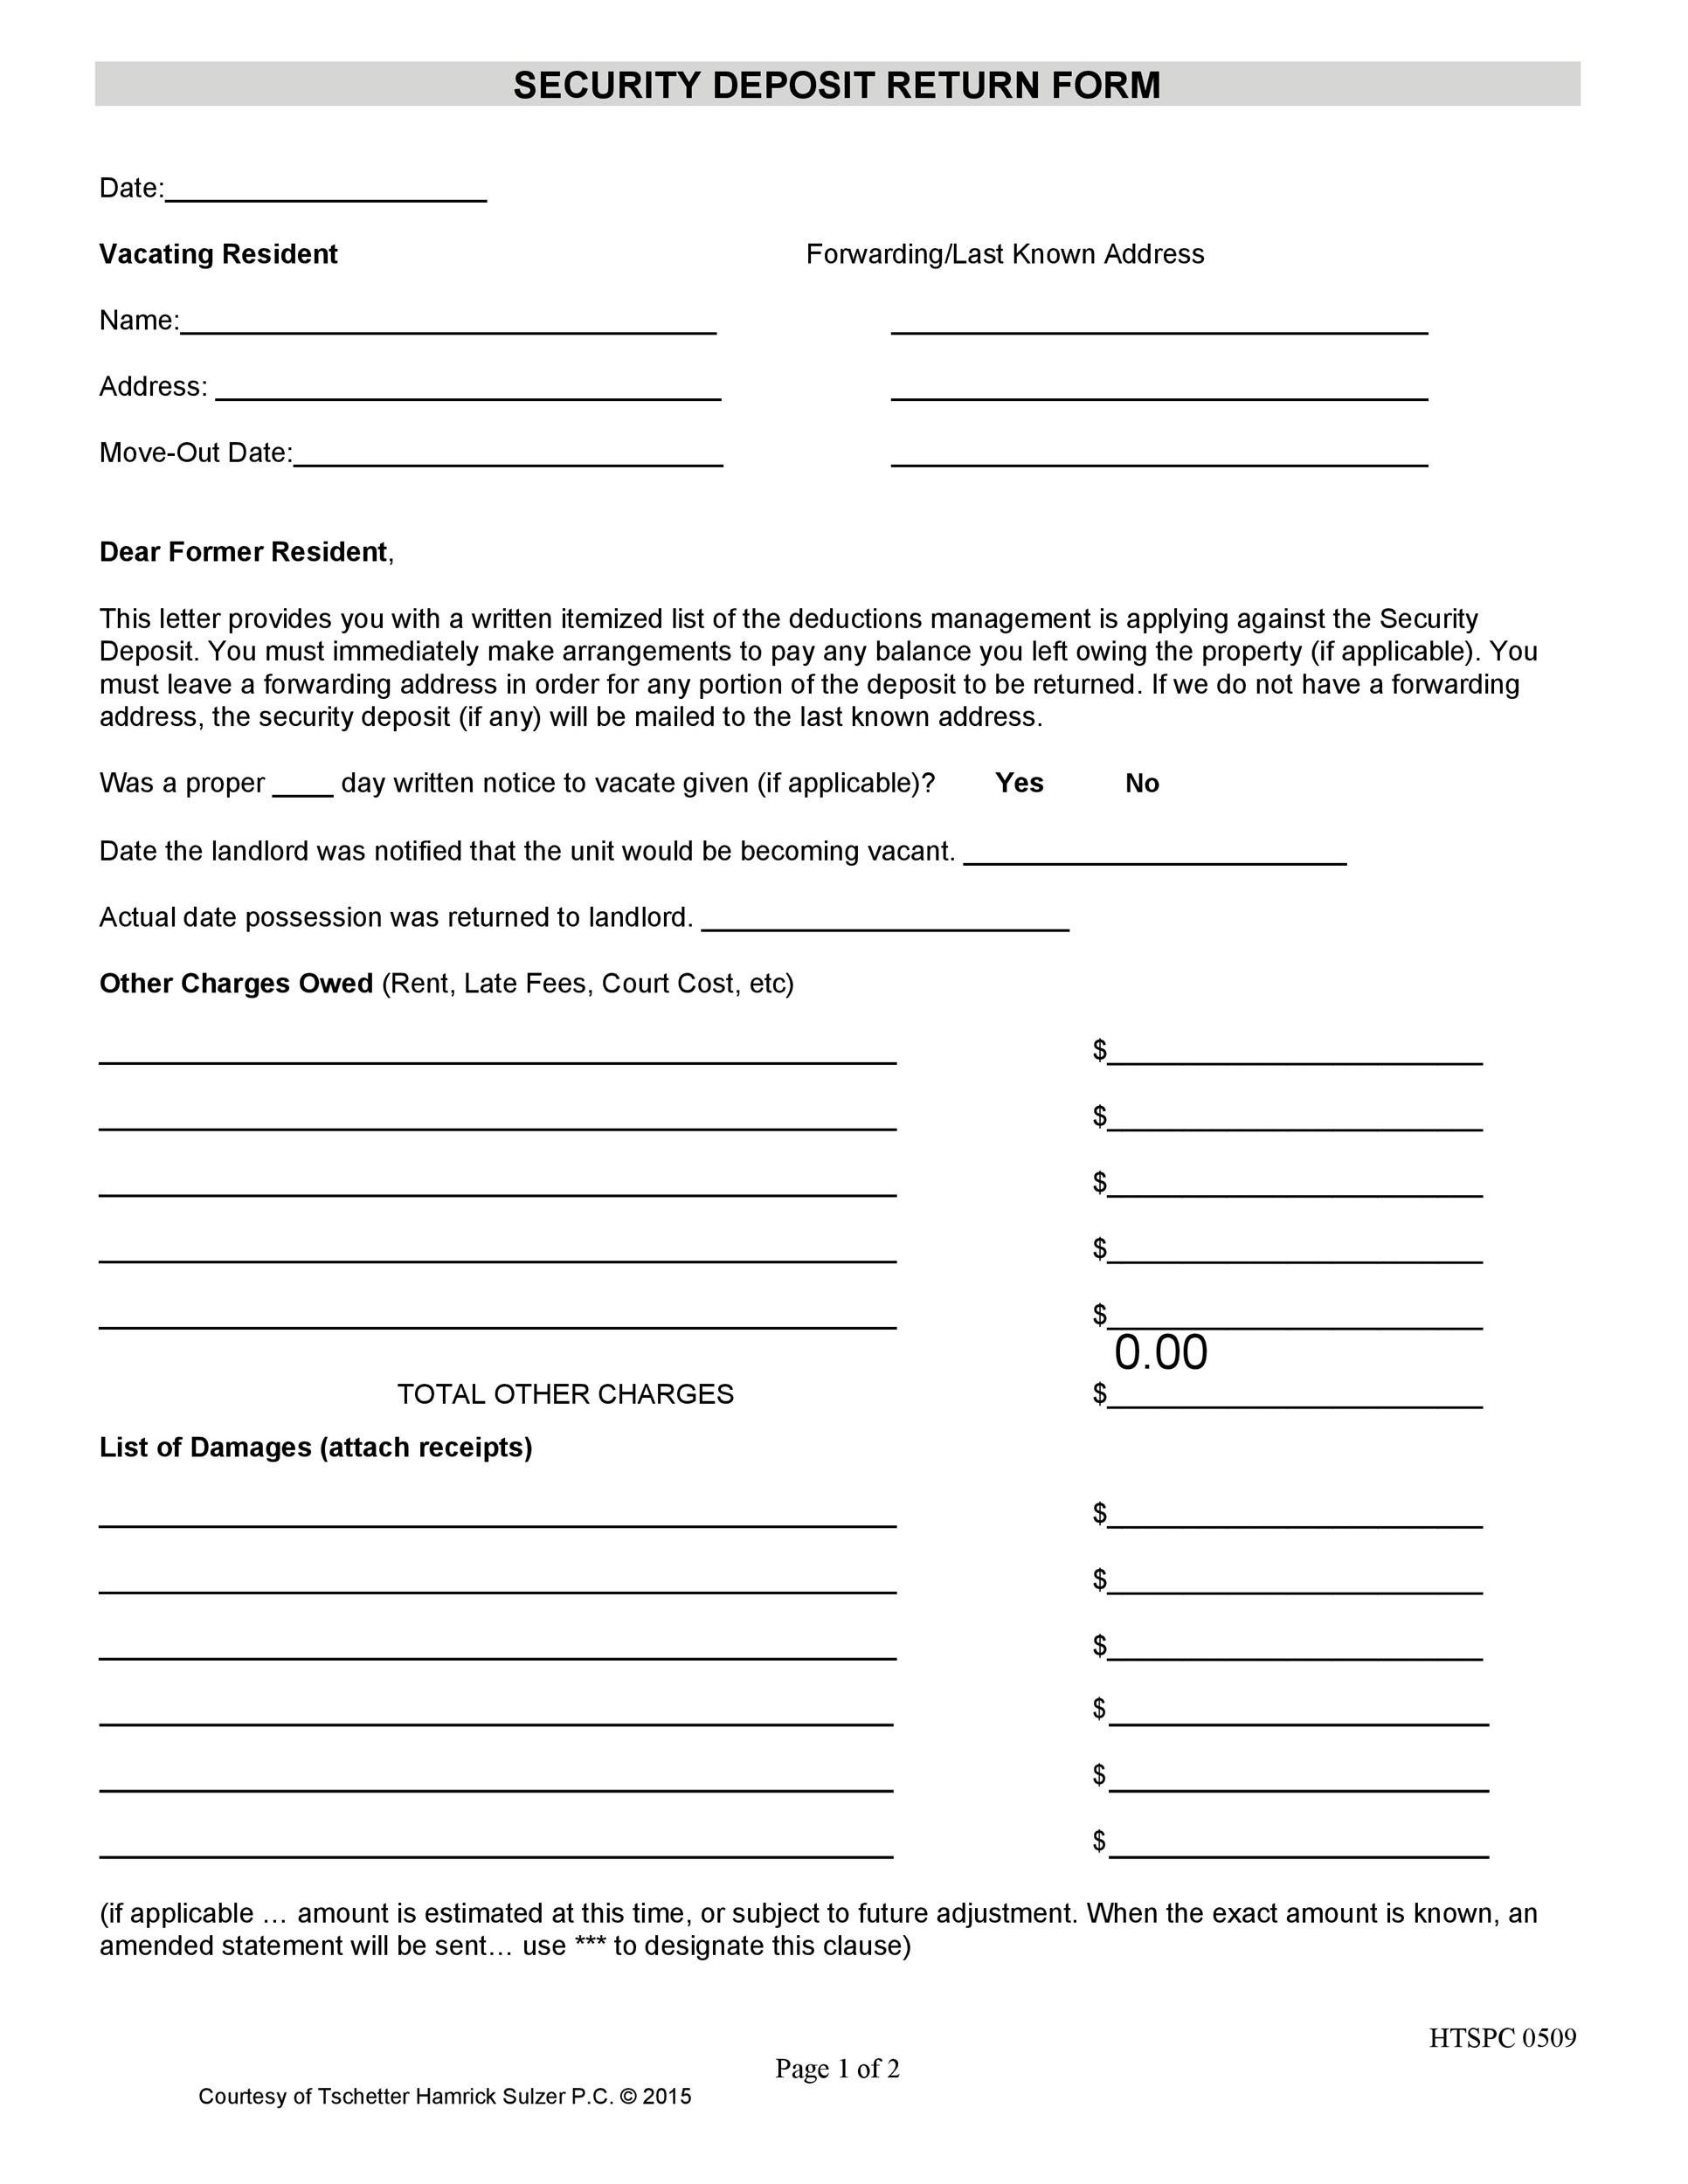 10 Effective Security Deposit Return Letters [MS Word] ᐅ TemplateLab With Regard To Security Deposit Refund Form Template Pertaining To Security Deposit Refund Form Template